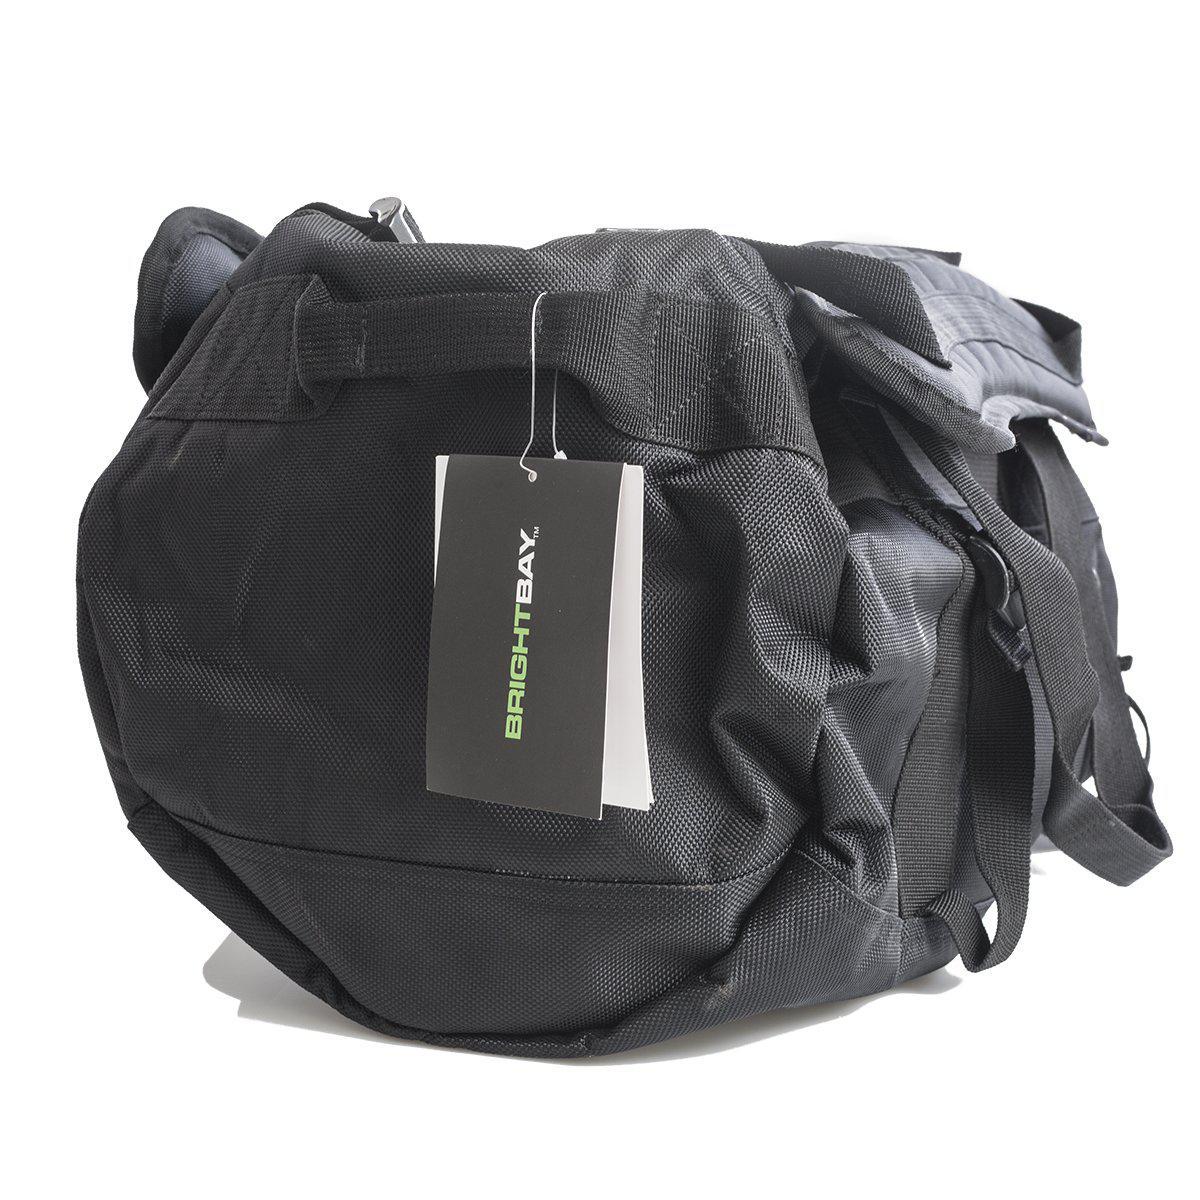 smell proof duffle bag